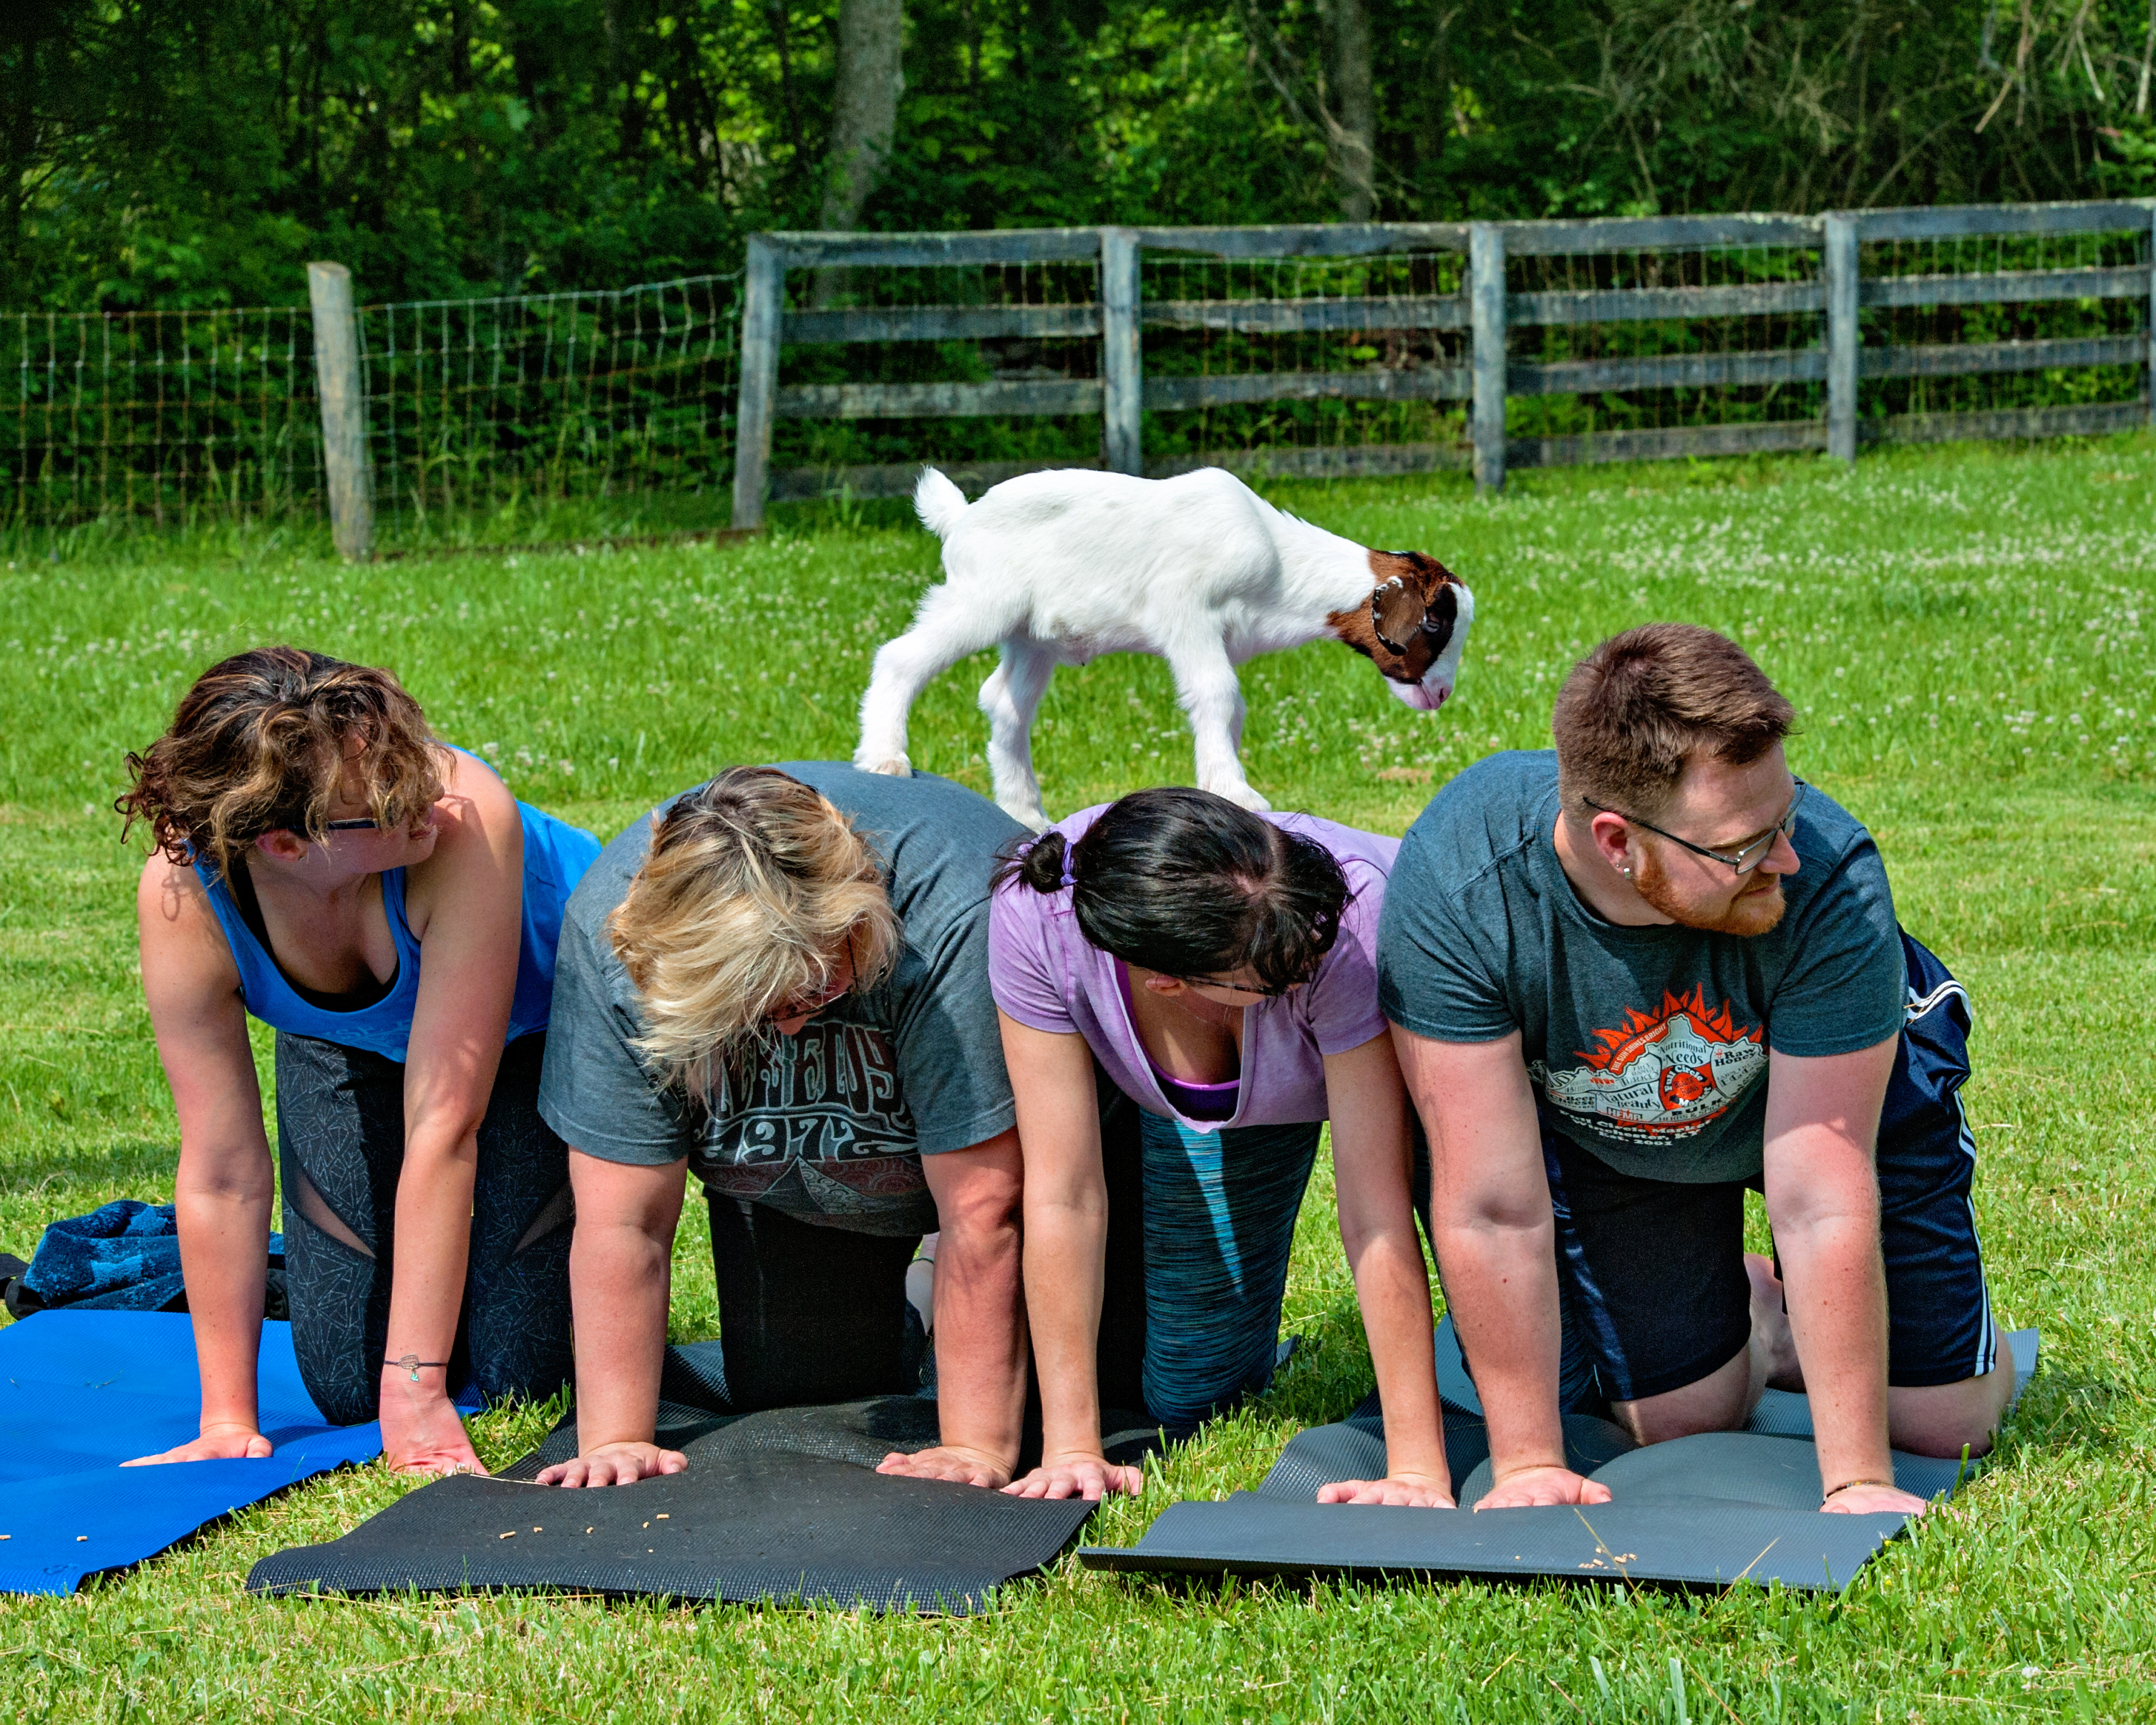 The Latest Fitness Craze Makes It To The Bluegrass StateGoat